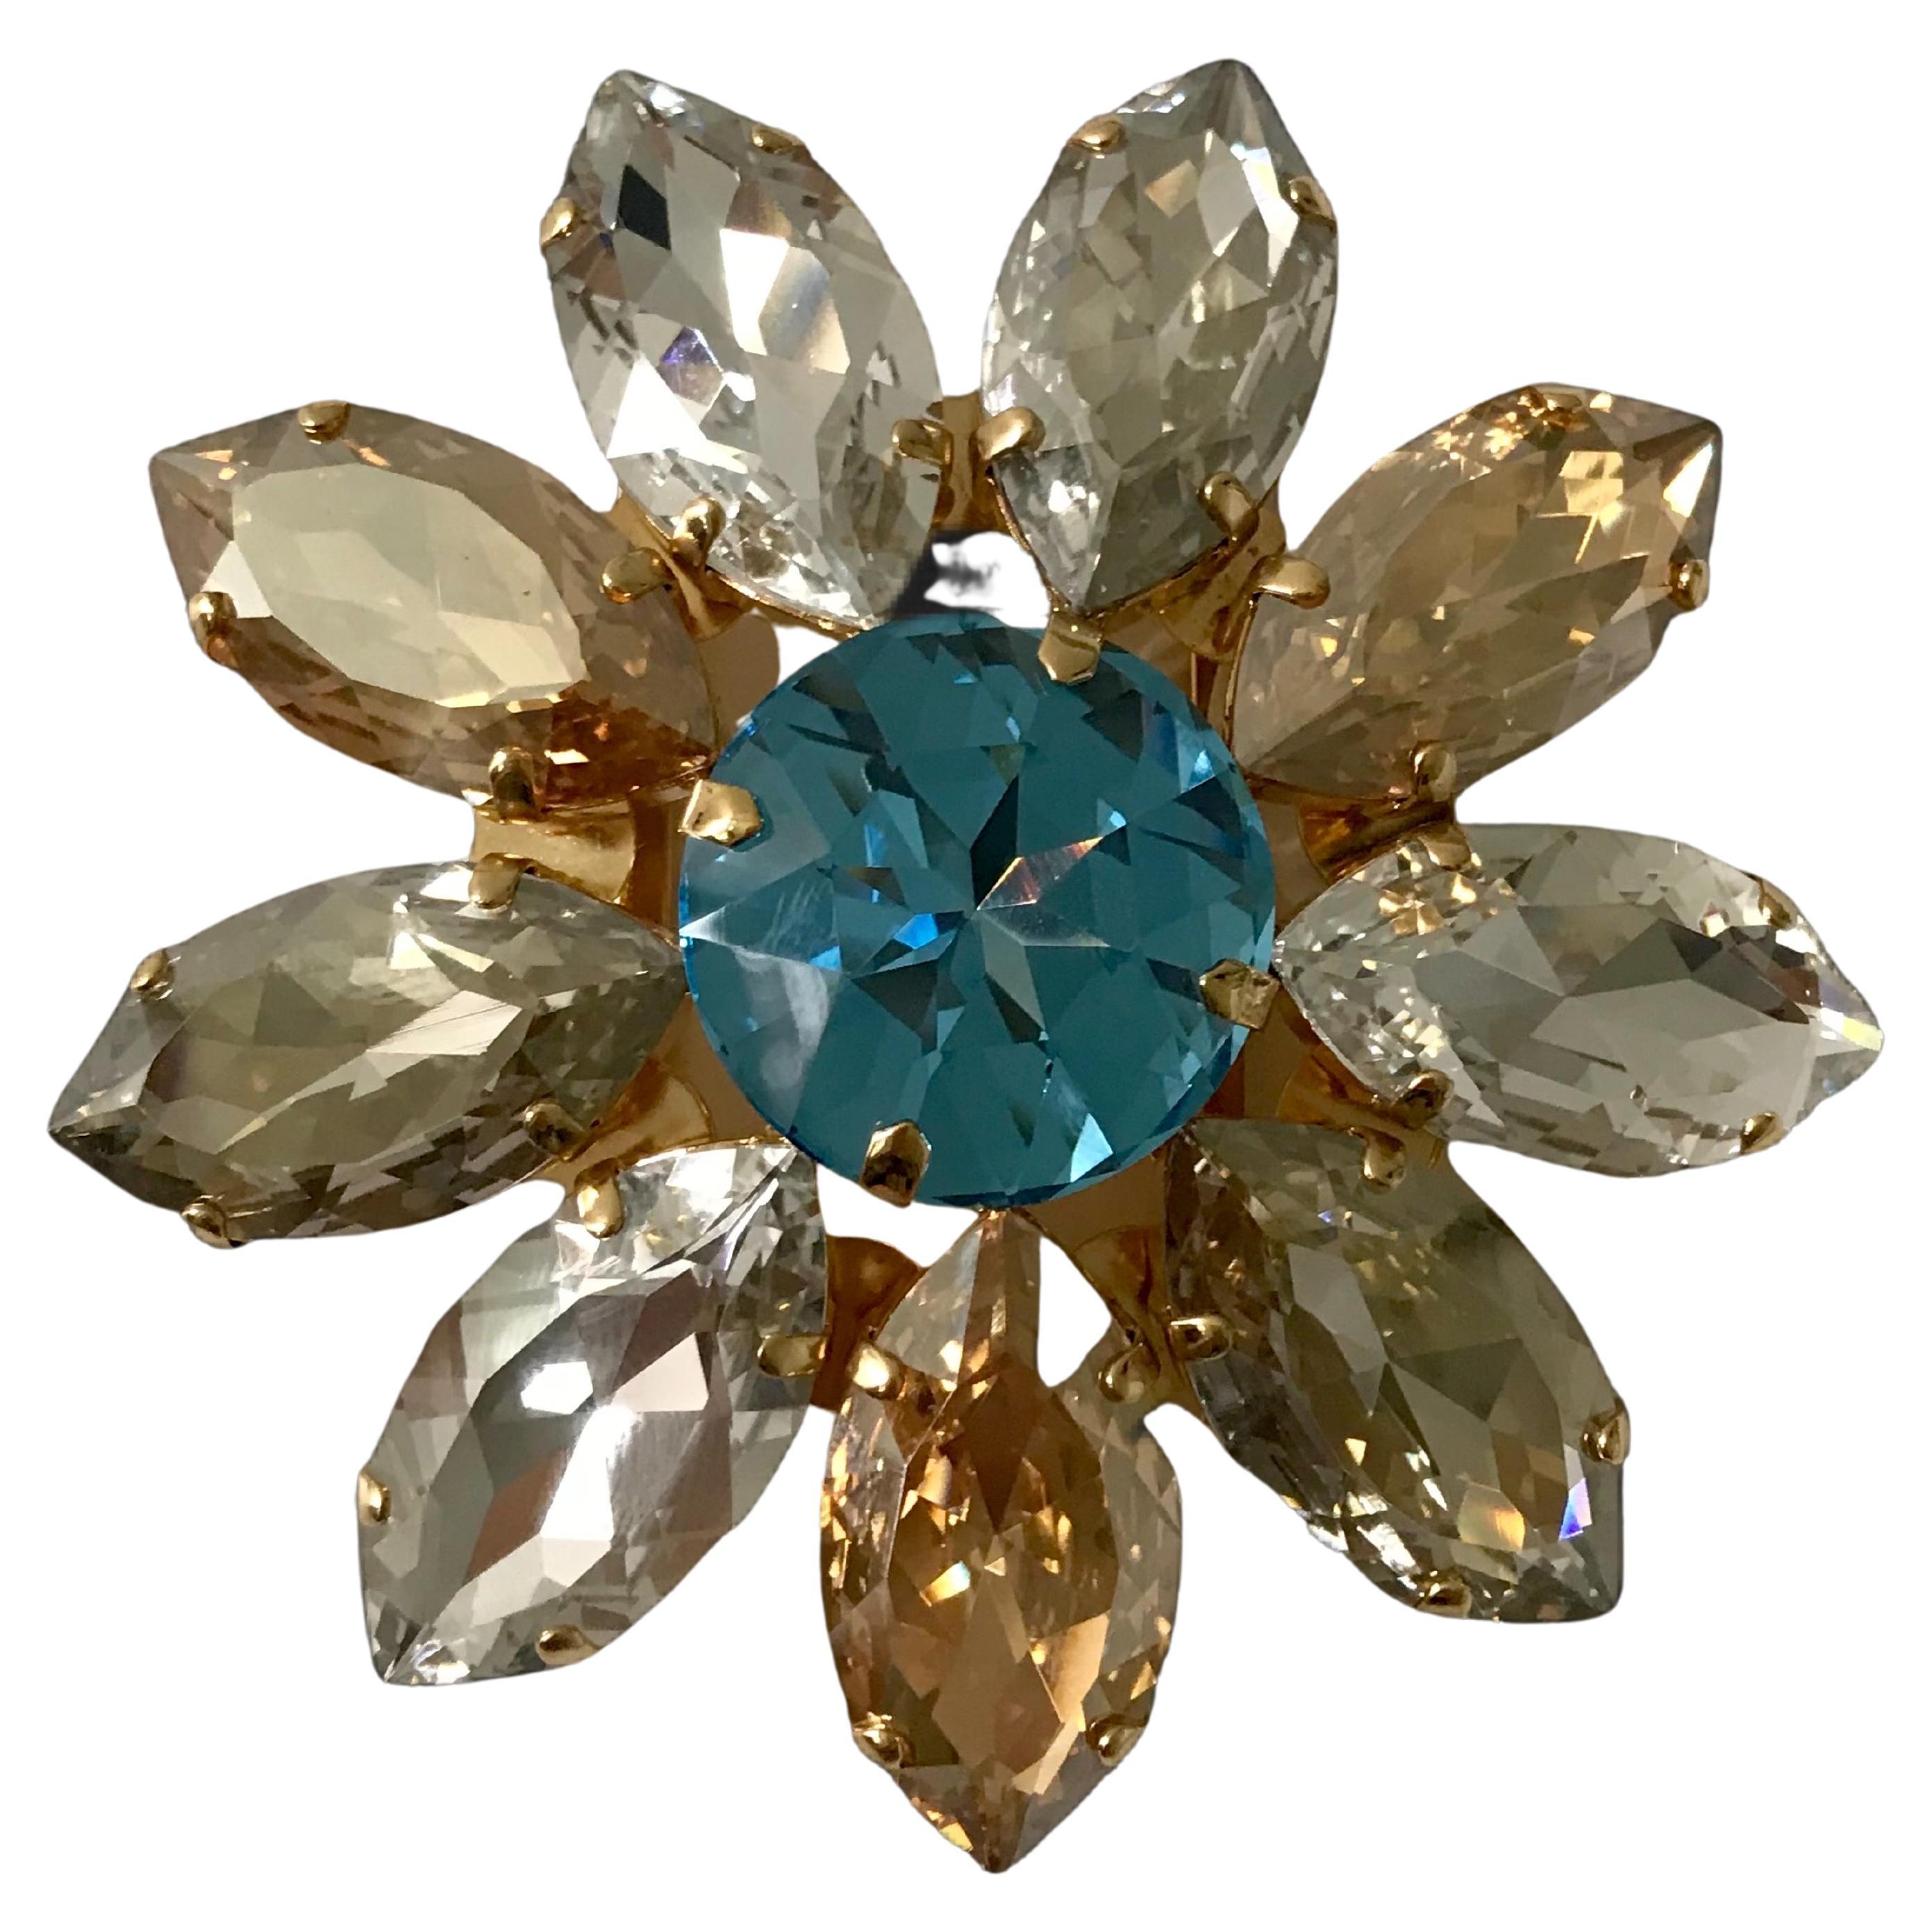 Pelush Blue And Amber Swarowsky Crystal Flower Brooch Buckle Pin - Large 